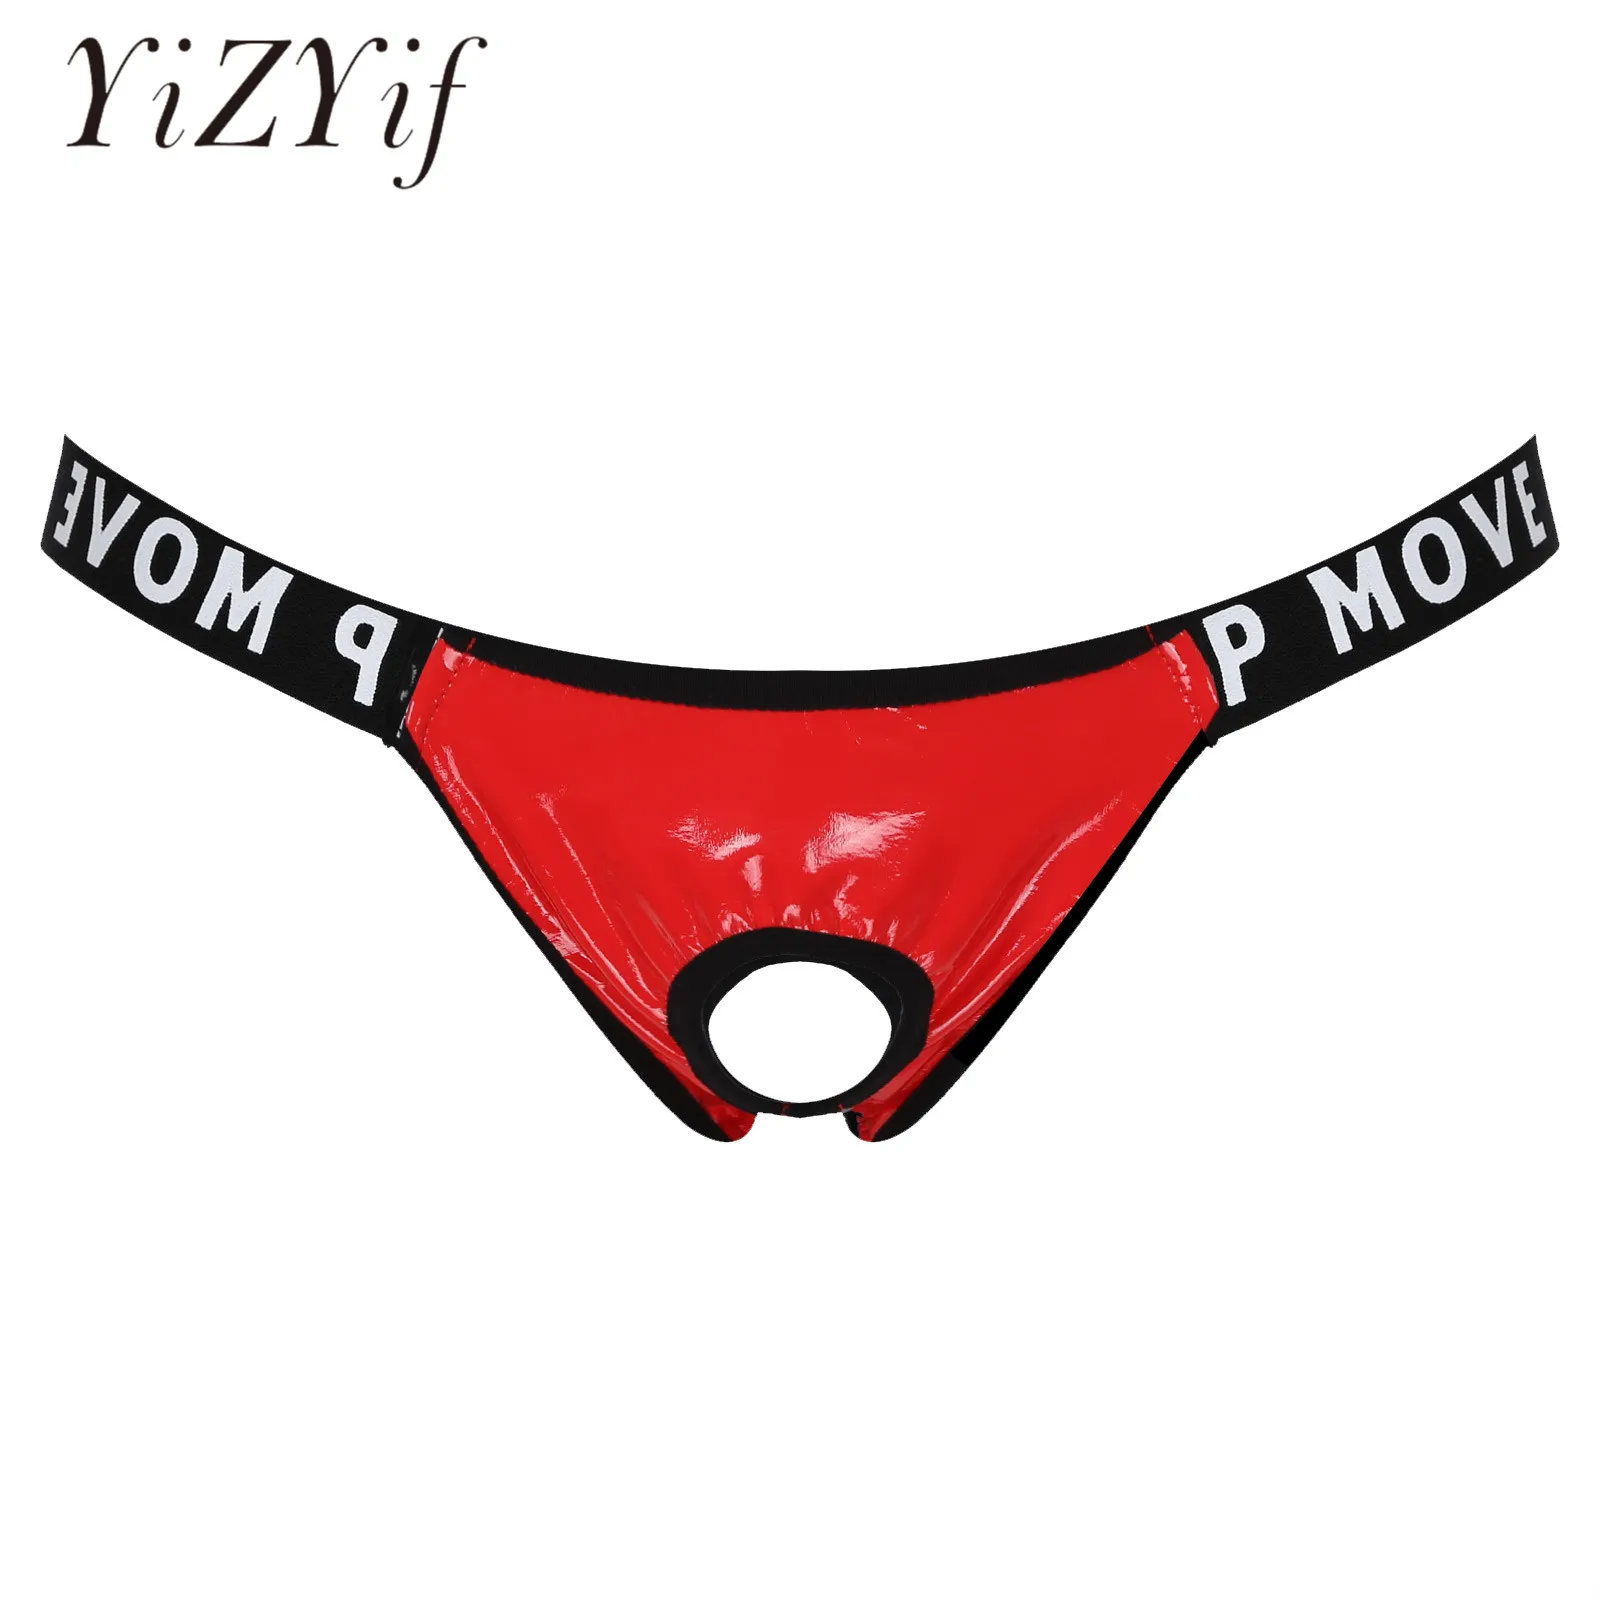 

Mens Patent Leather Bulge Pouch Lingerie Underwear Hollow Out Jockstrap T-Back Letter Print Waistband Thongs Sexy Gay Panties